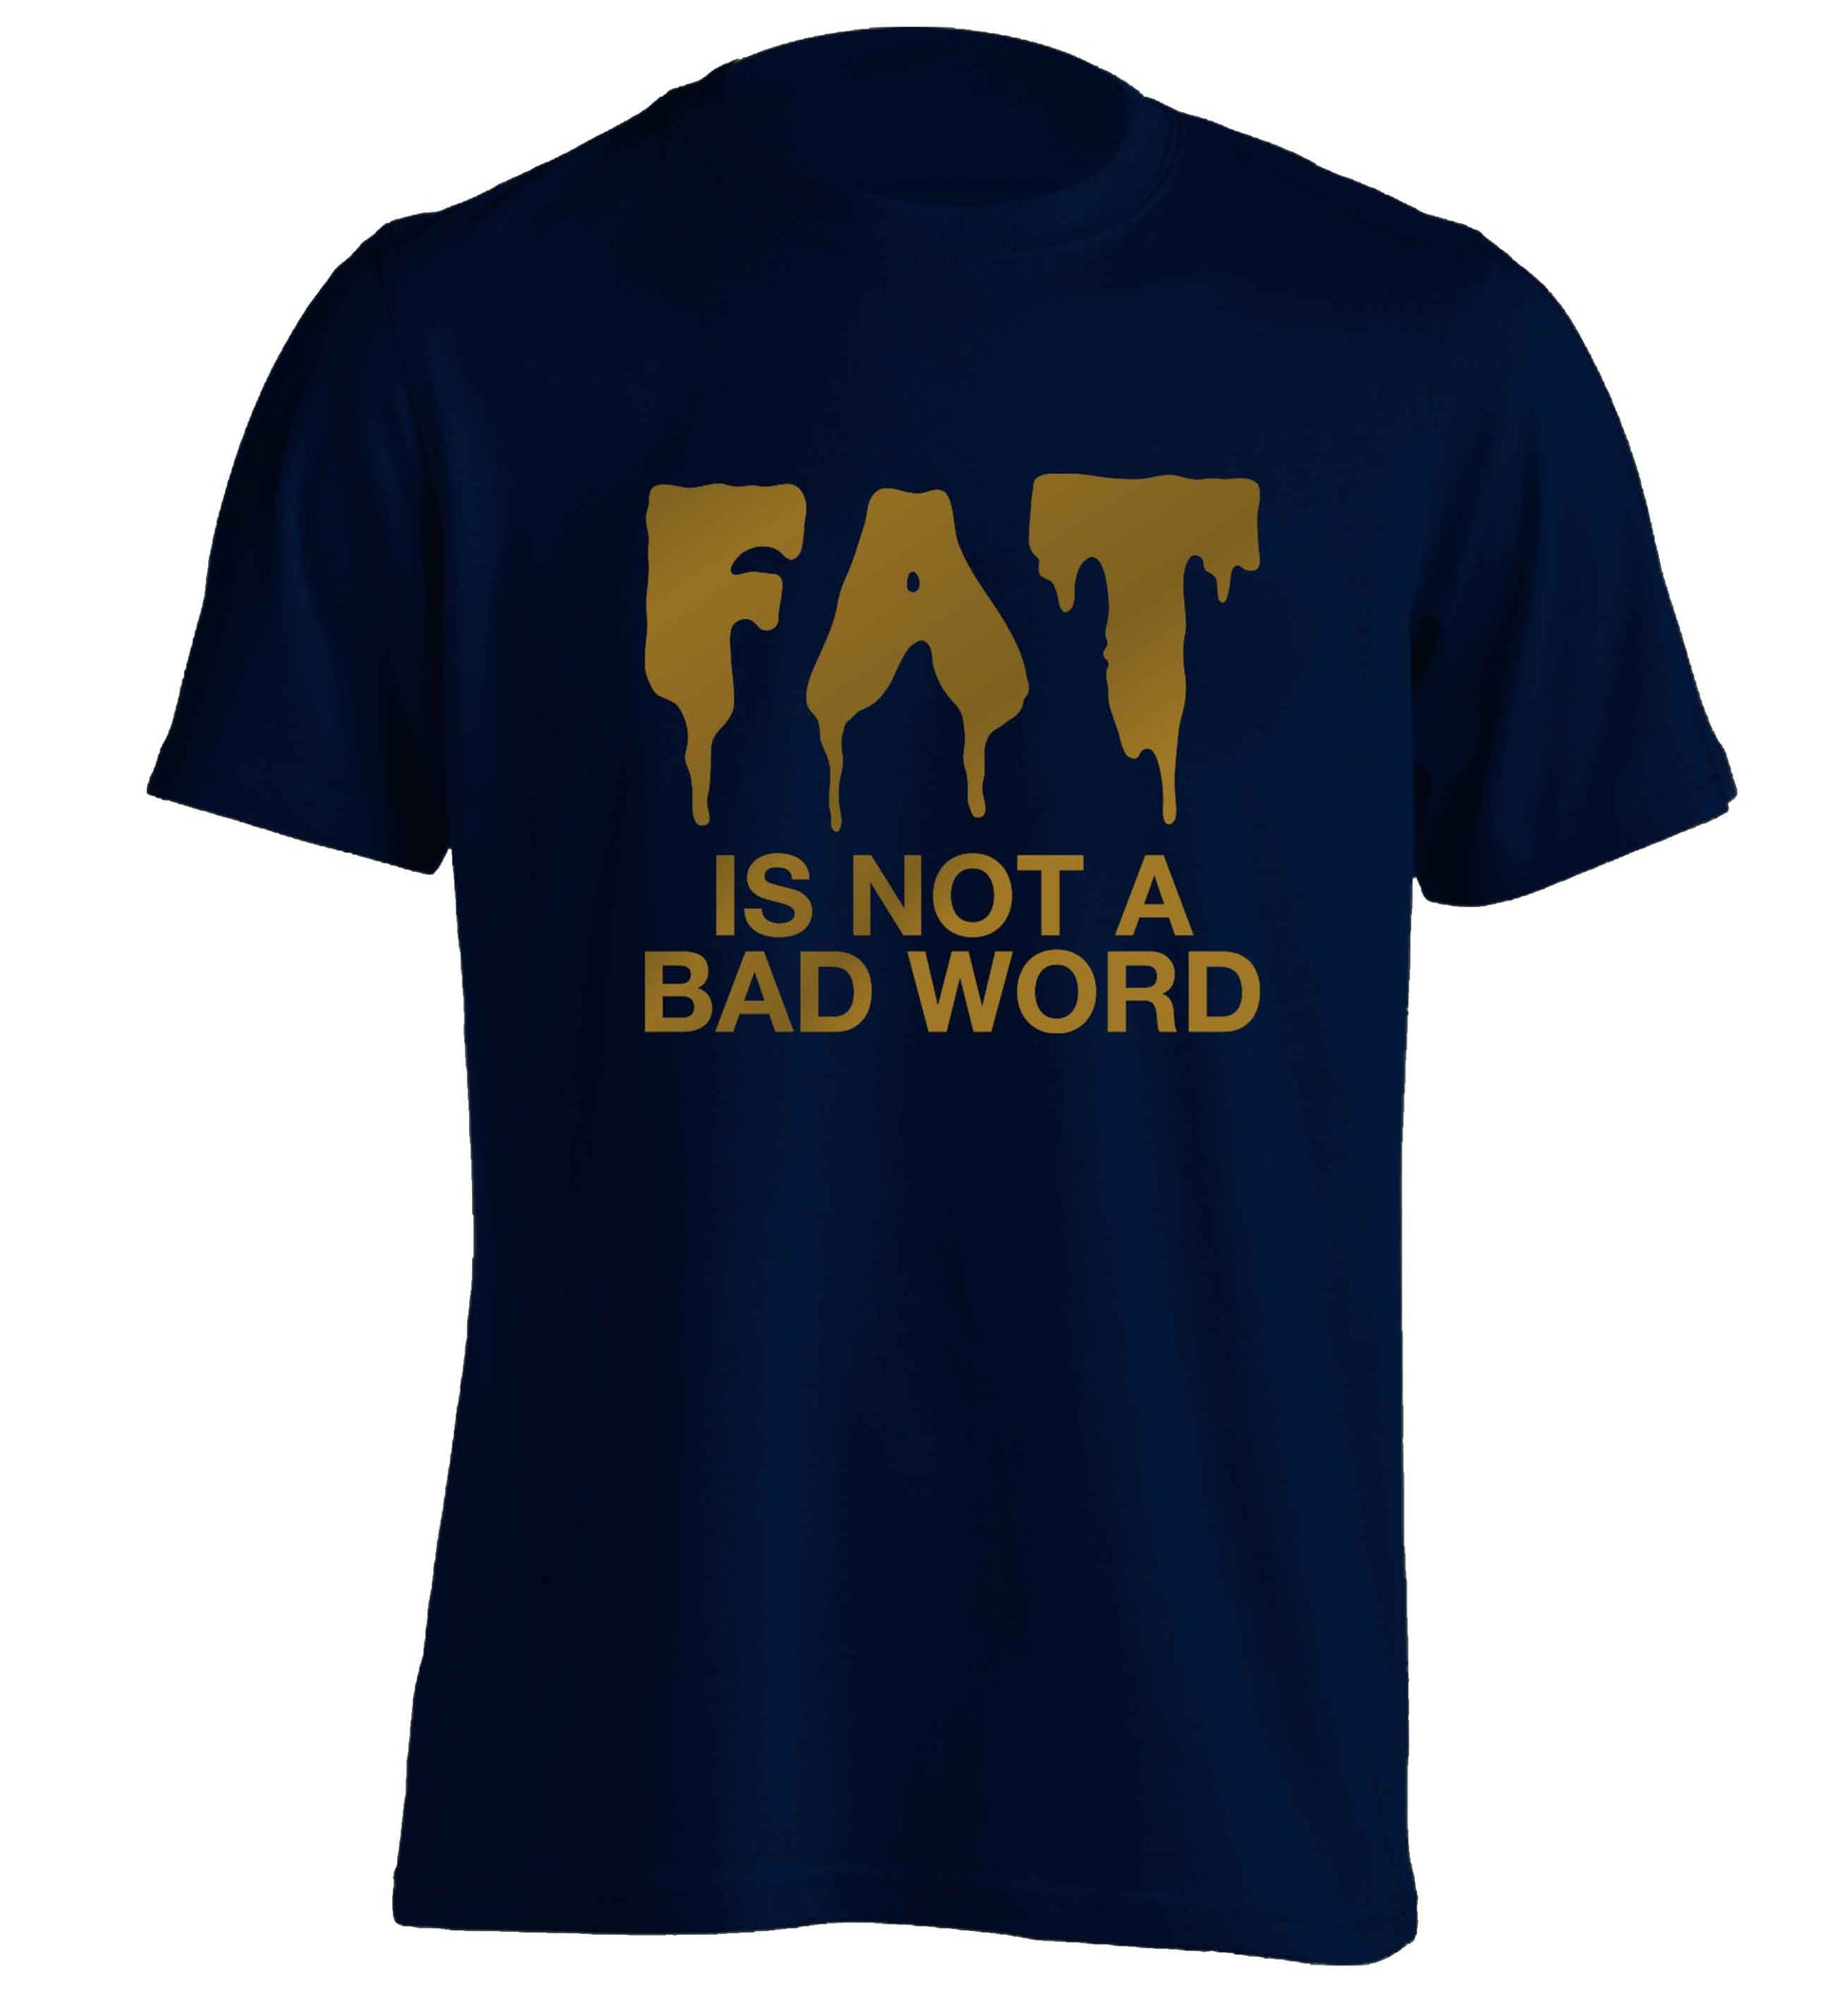 Fat is not a bad word adults unisex navy Tshirt 2XL